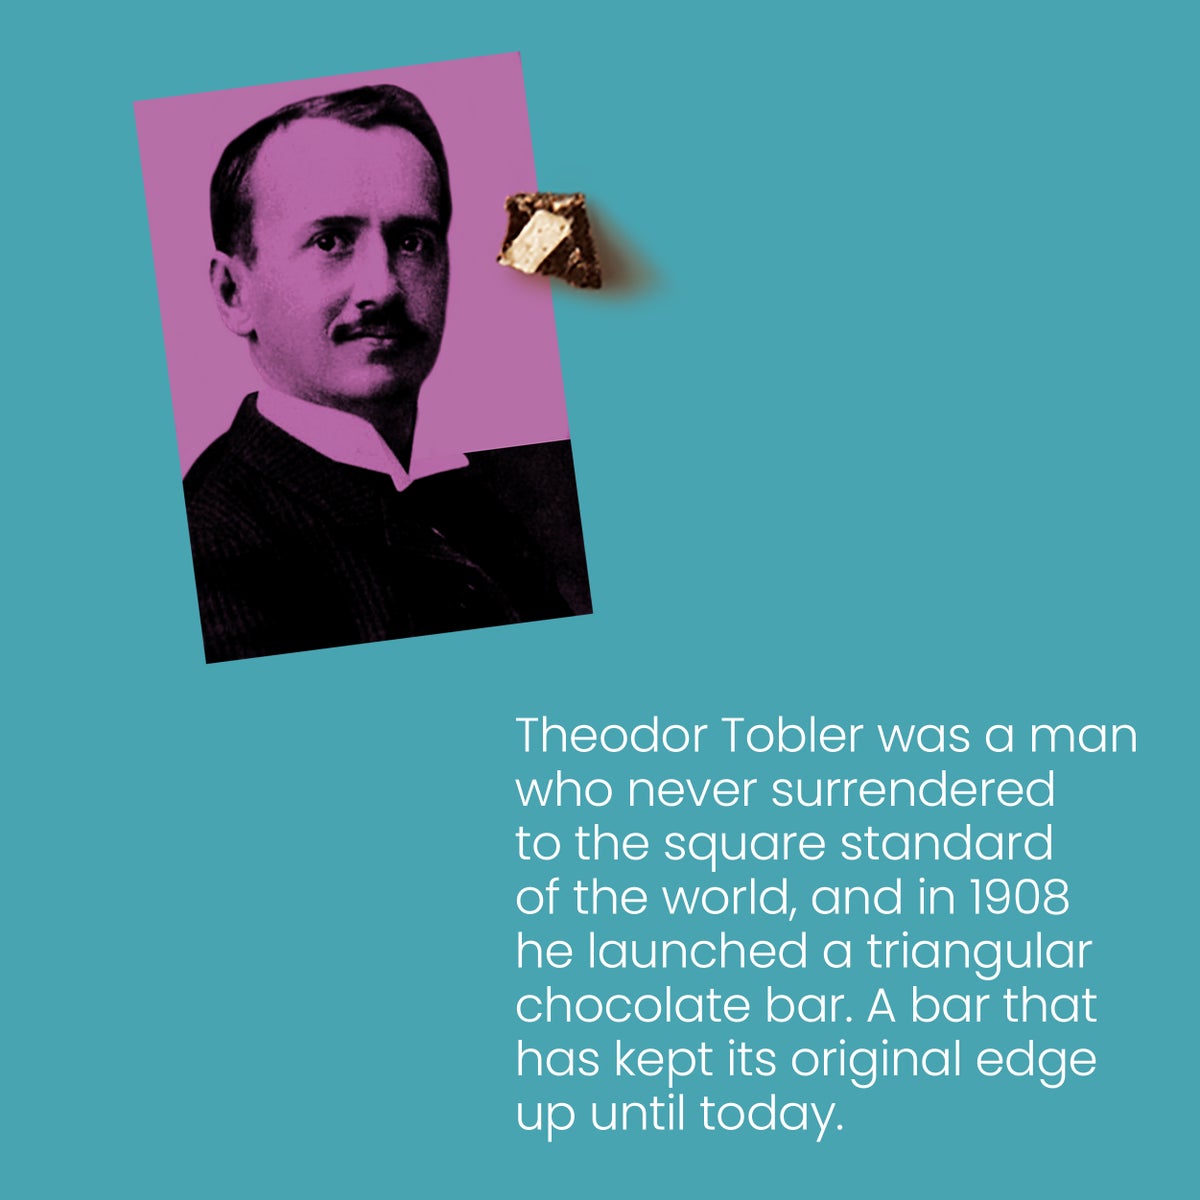 Theodor Tobler was a man who never surrendered to the square standard of the world, and in 1908 he launched a triangular chocolate bar. A bar that has kept its original edge up until today.